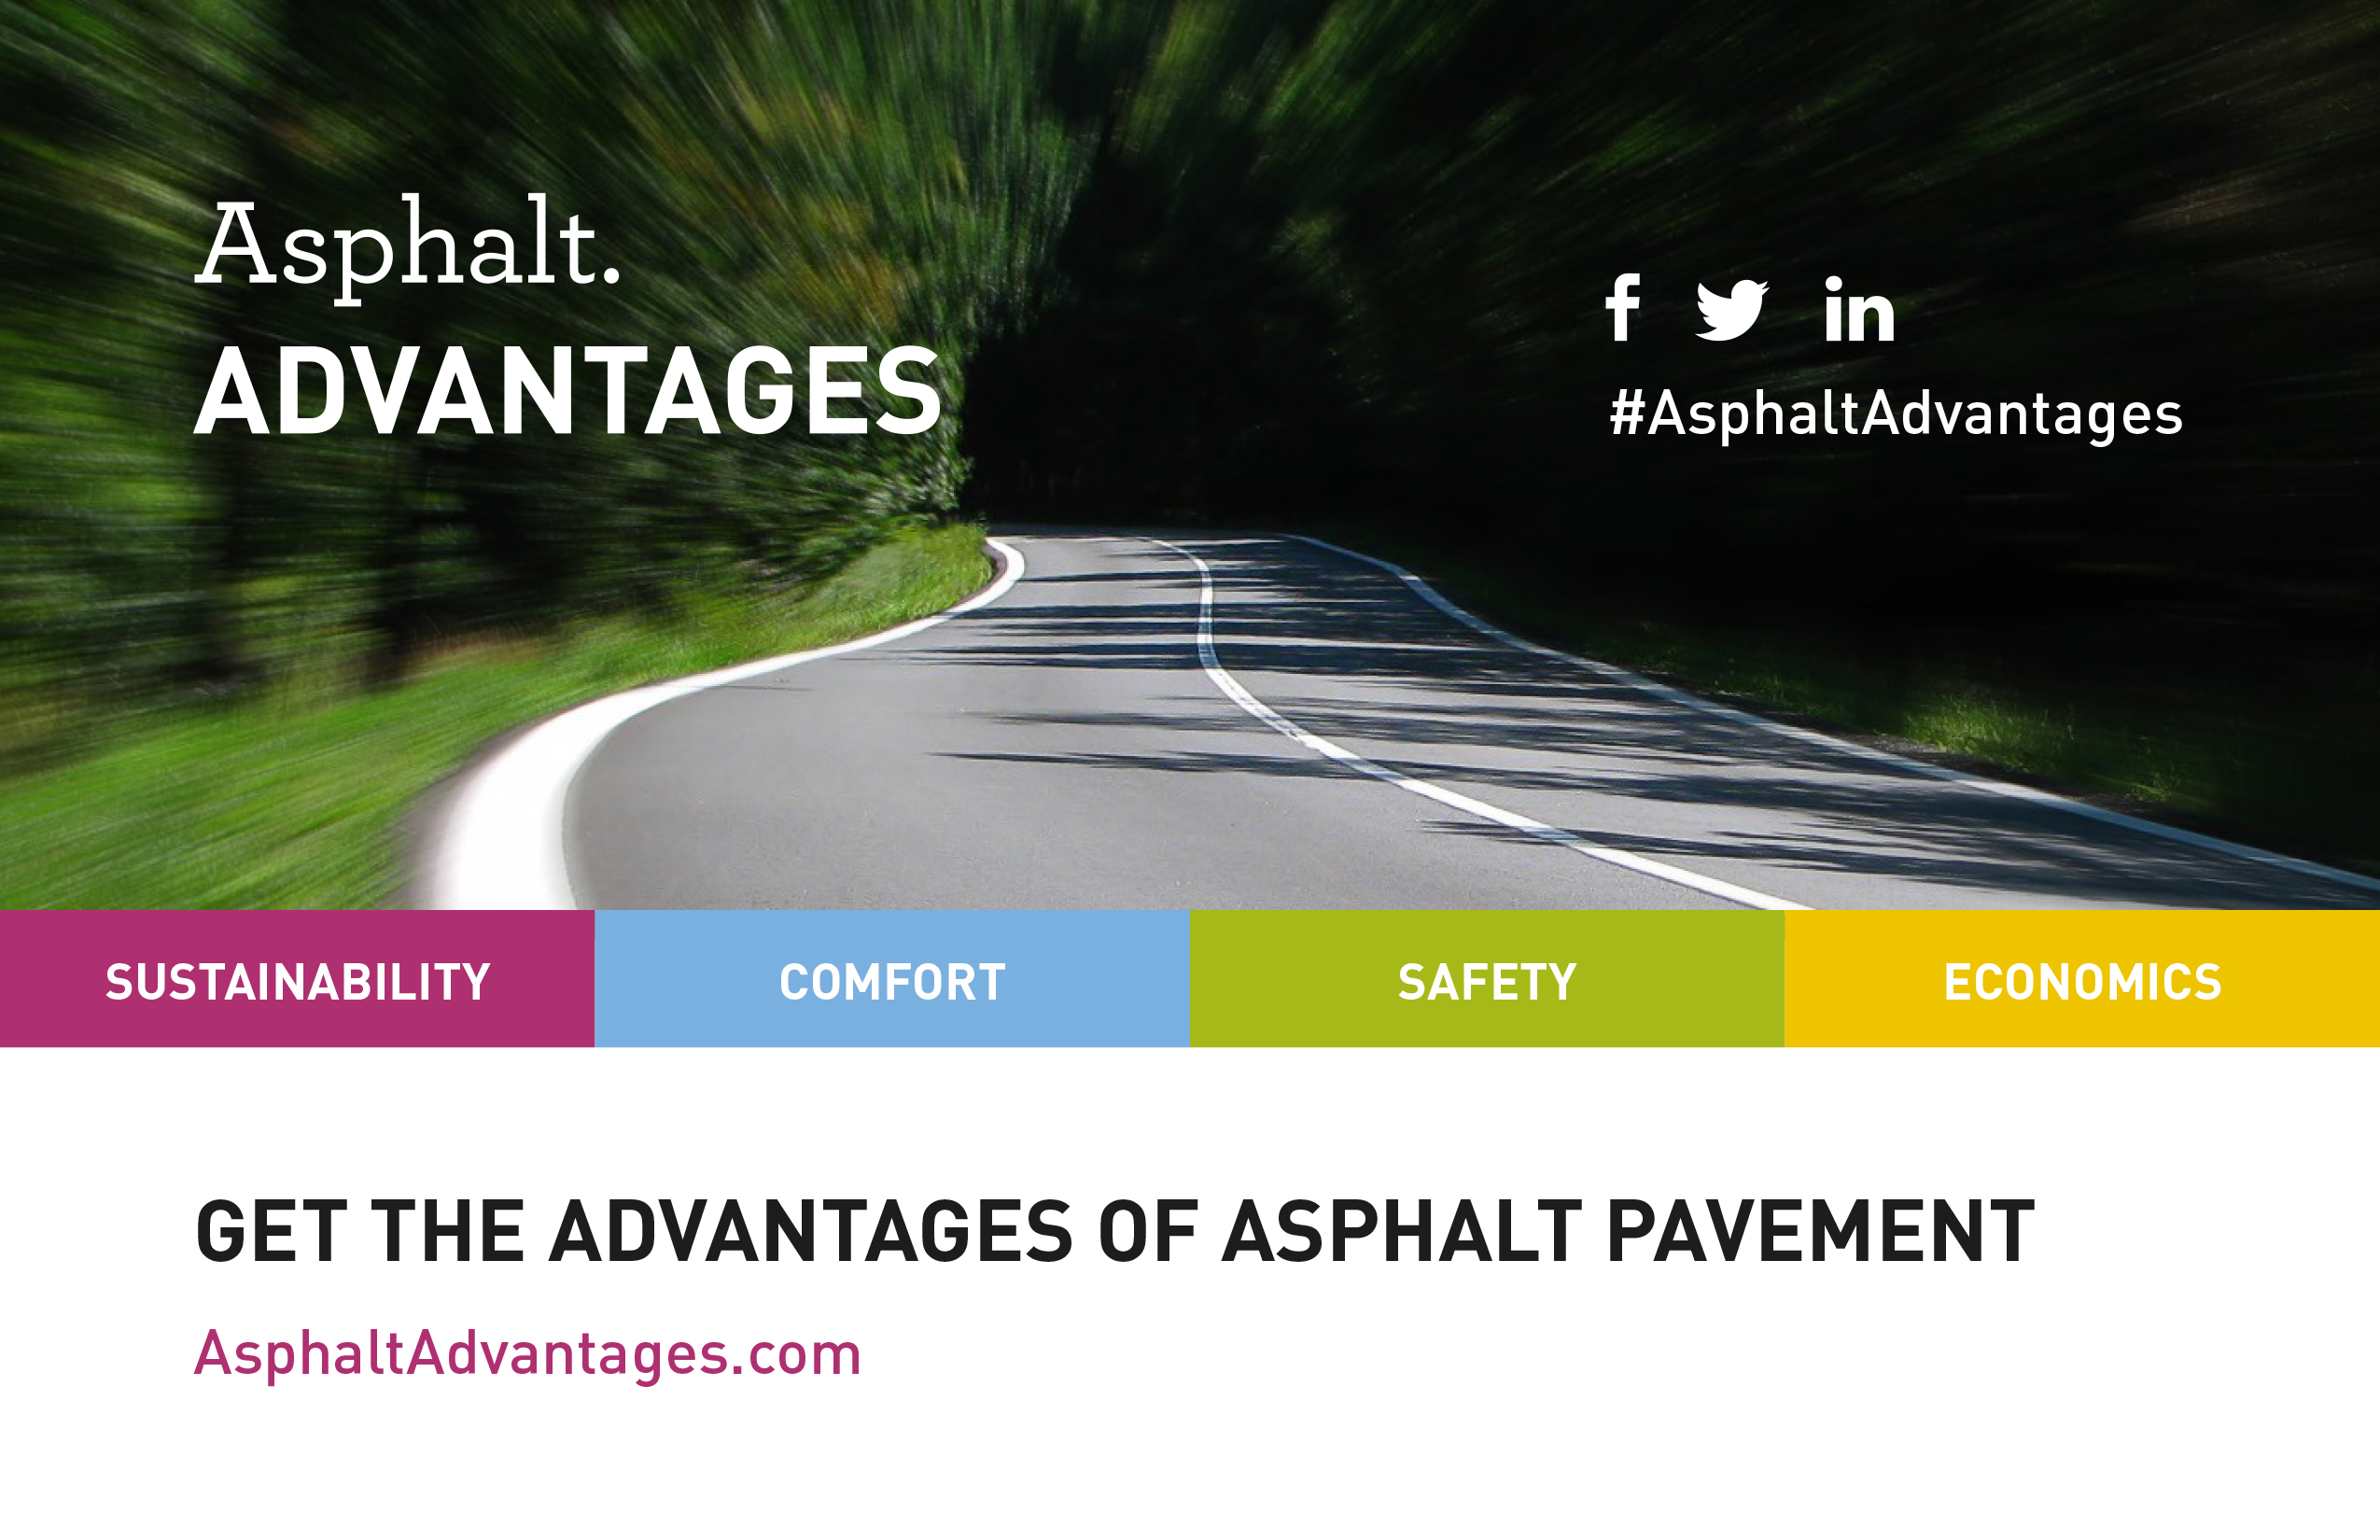 Guide to the Uses of Asphalt